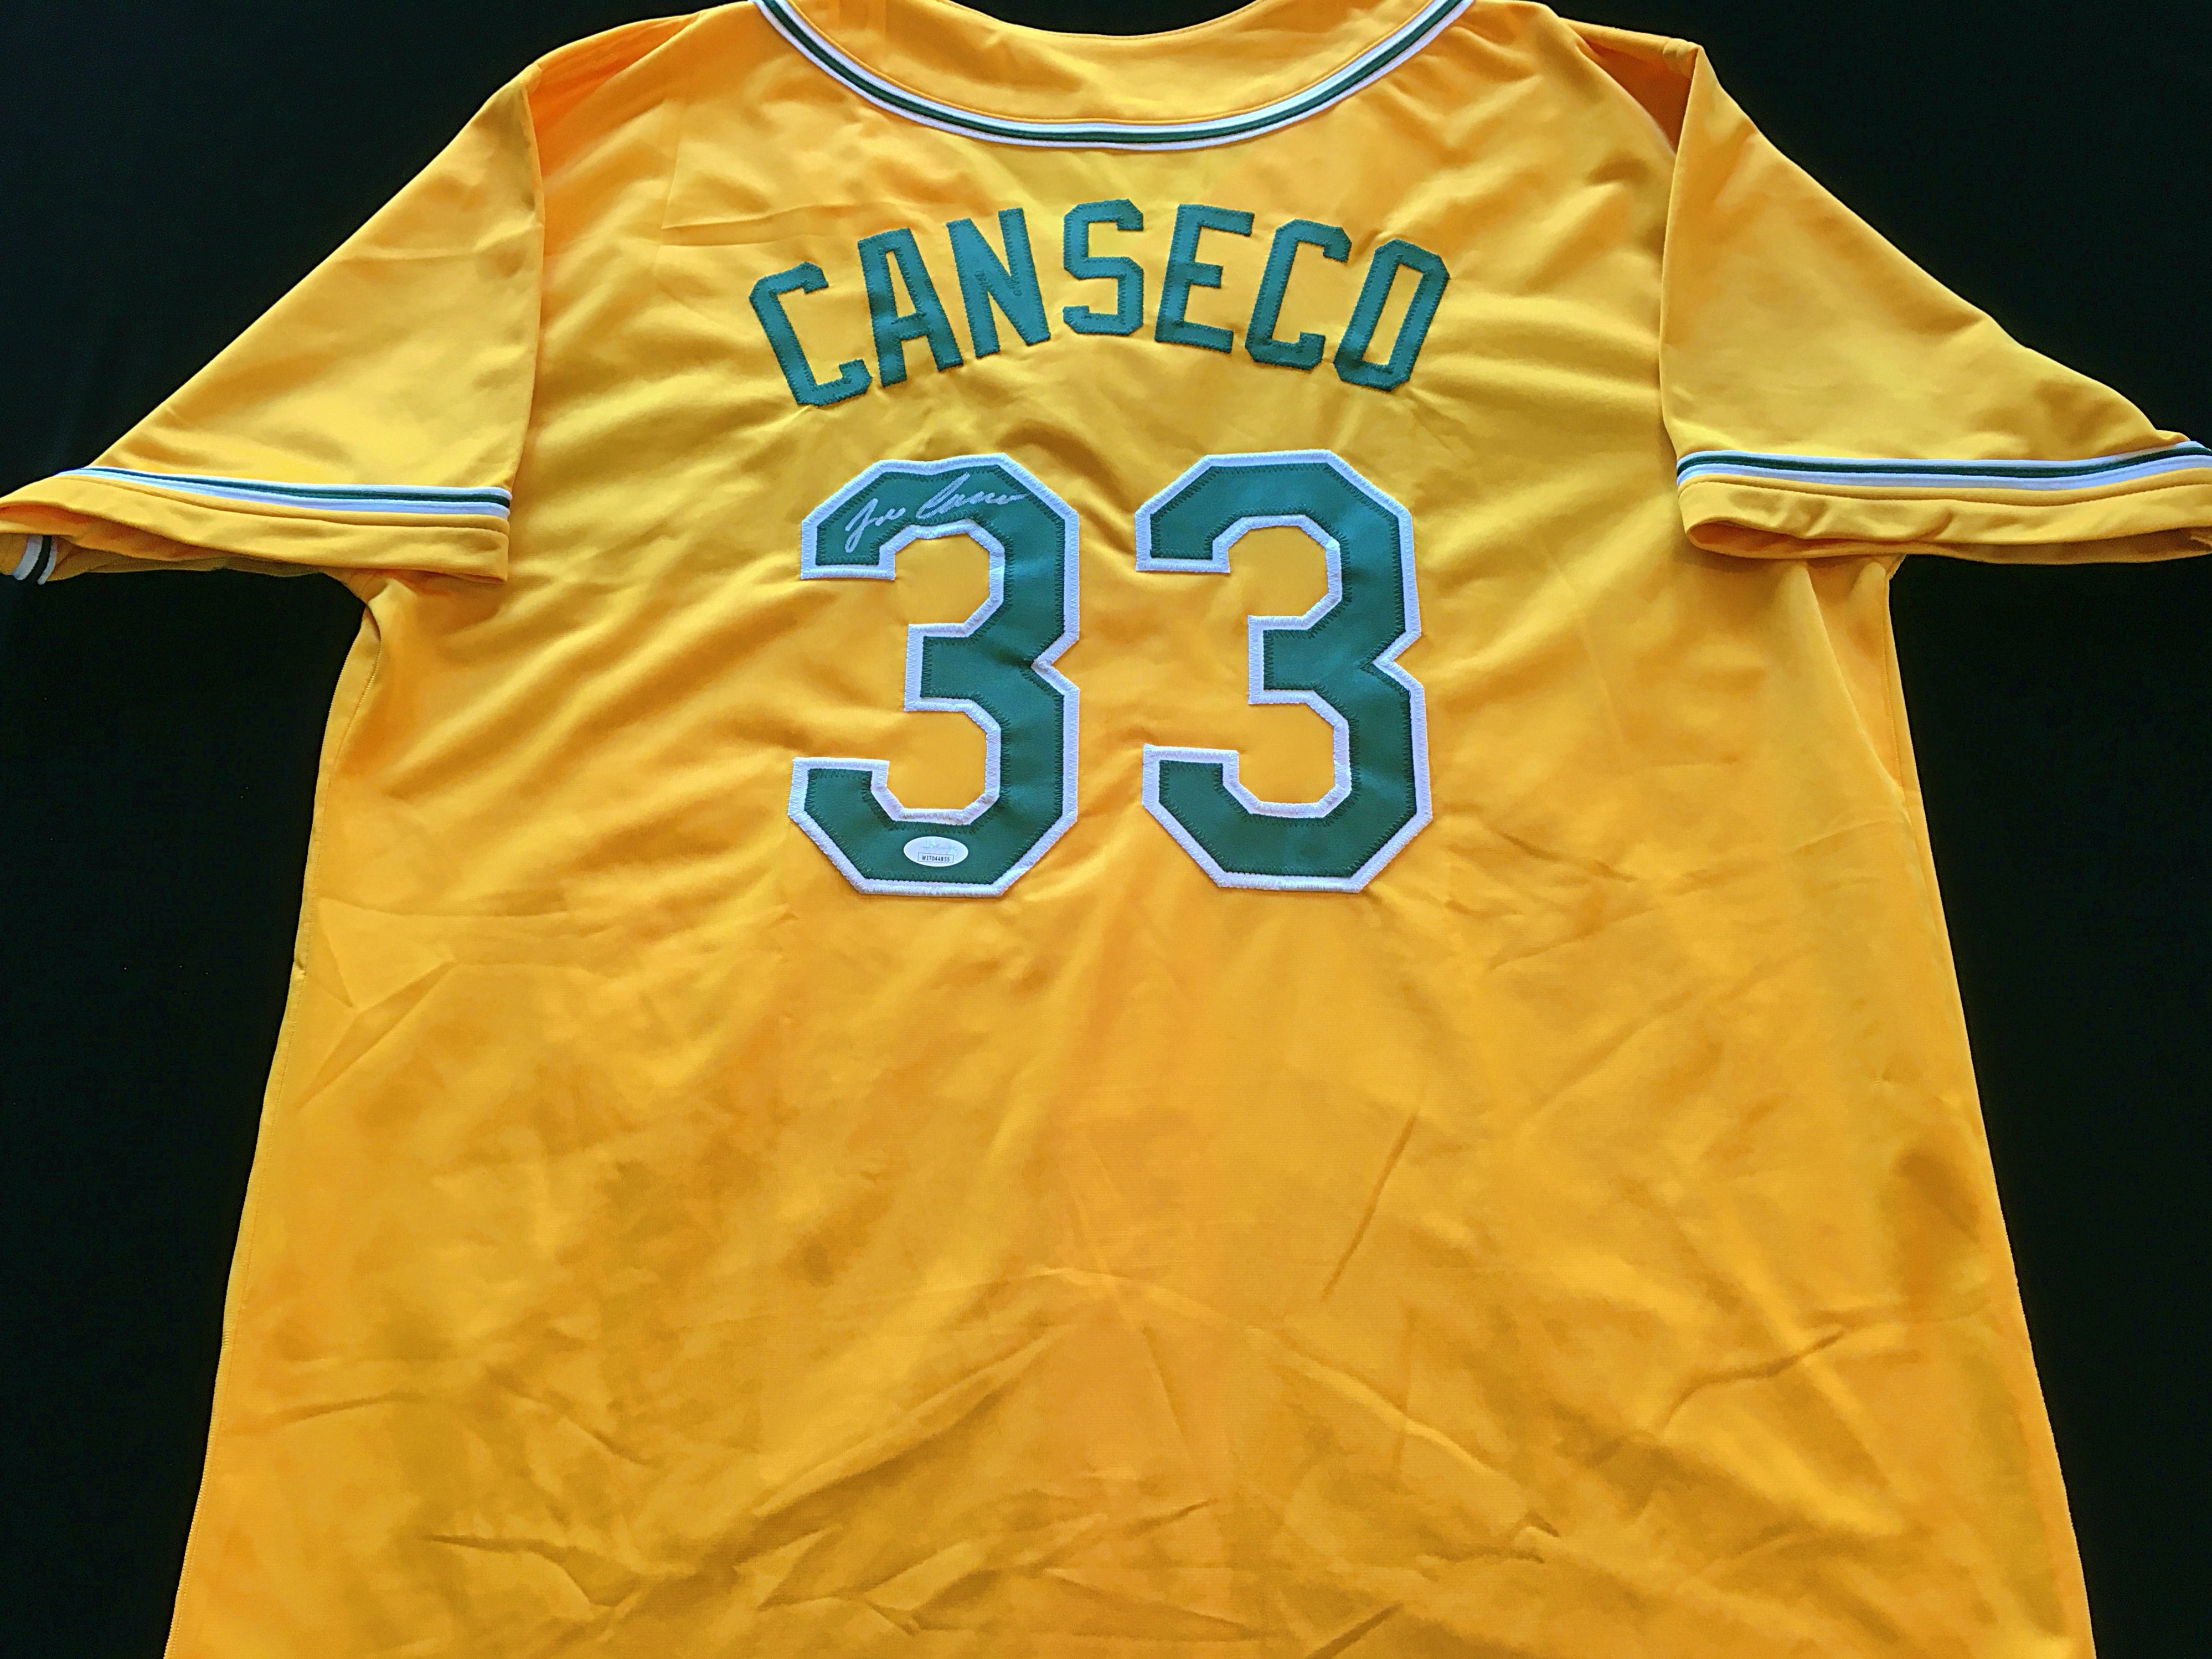 Jose Canseco Autographed Yellow Baseball Jersey: BM Authentics – HUMBL  Authentics